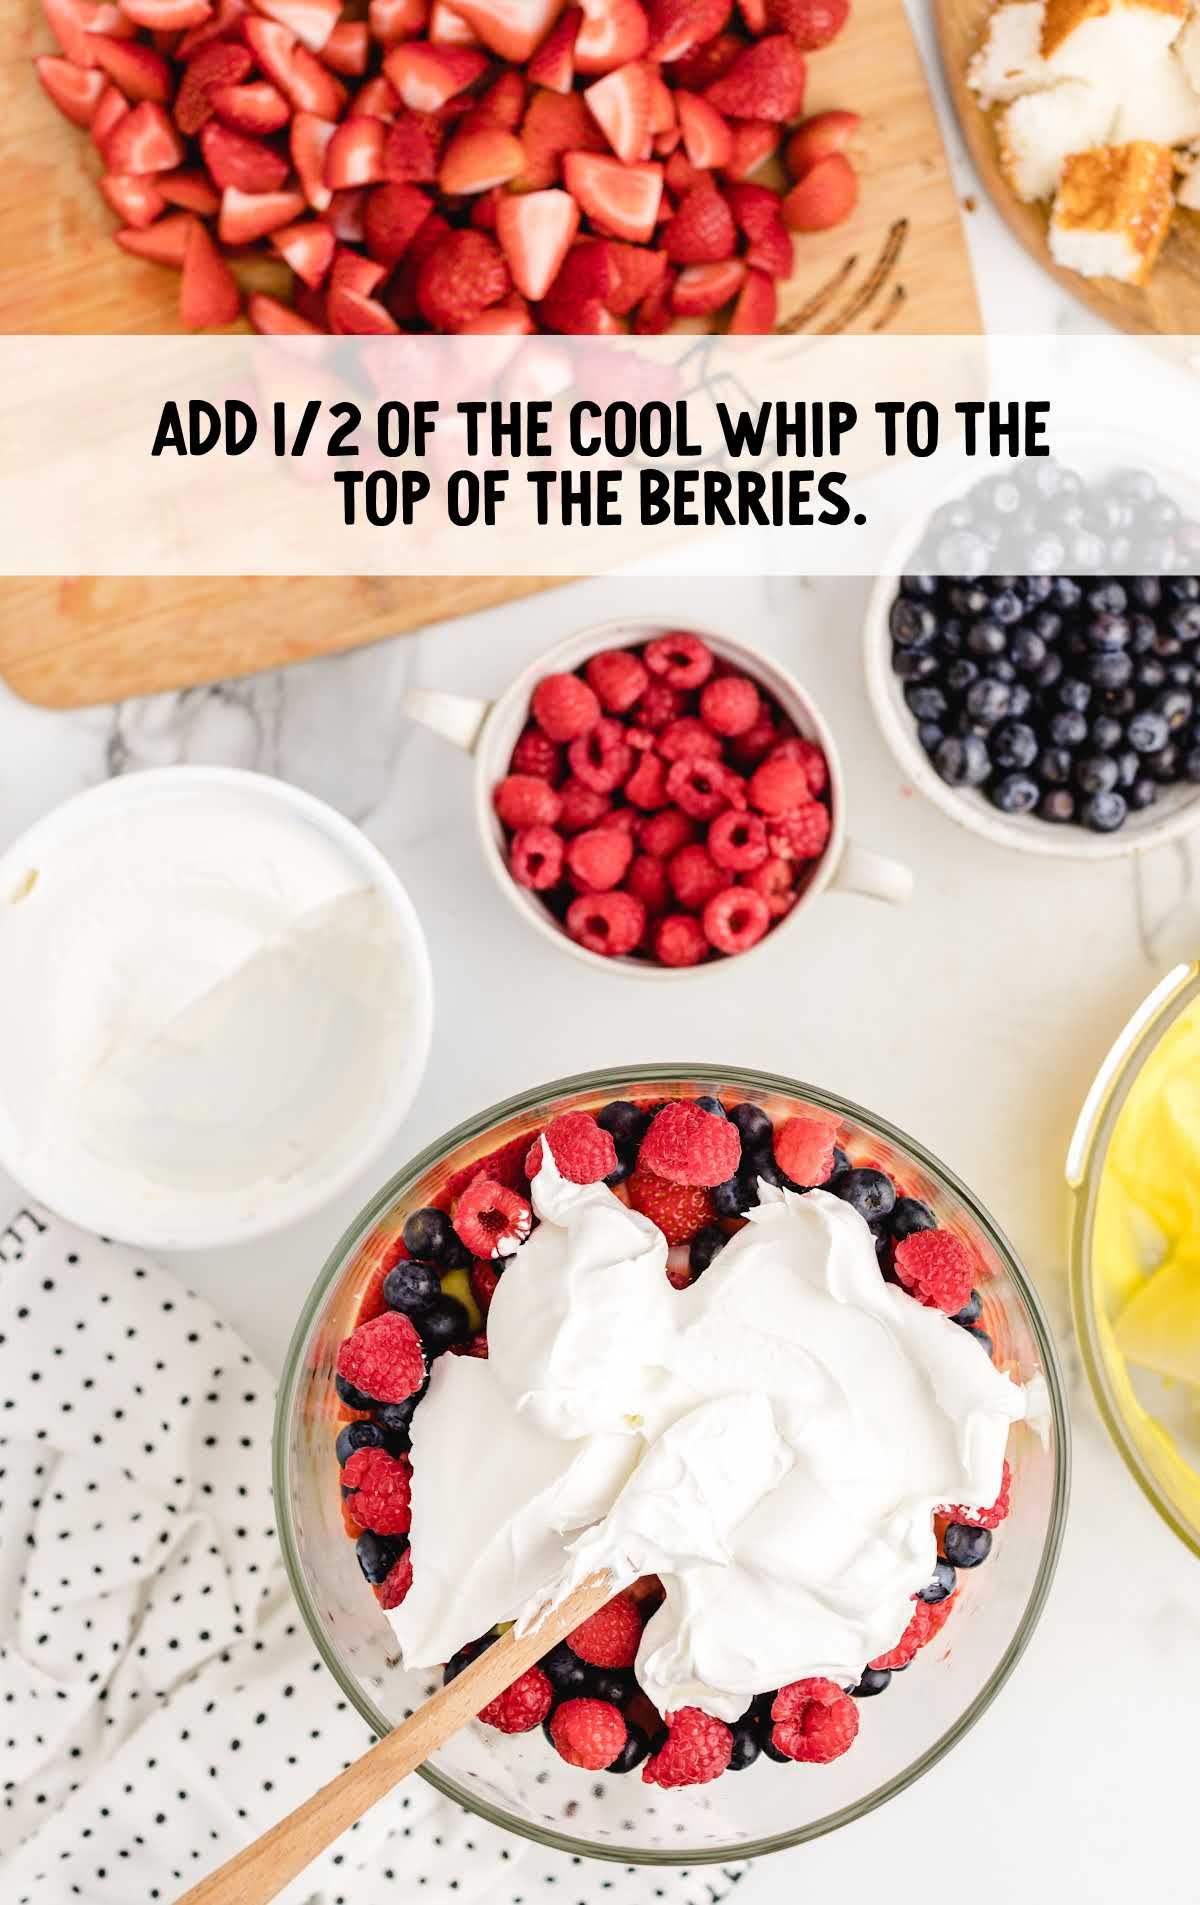 cool whip spread on top of the berries